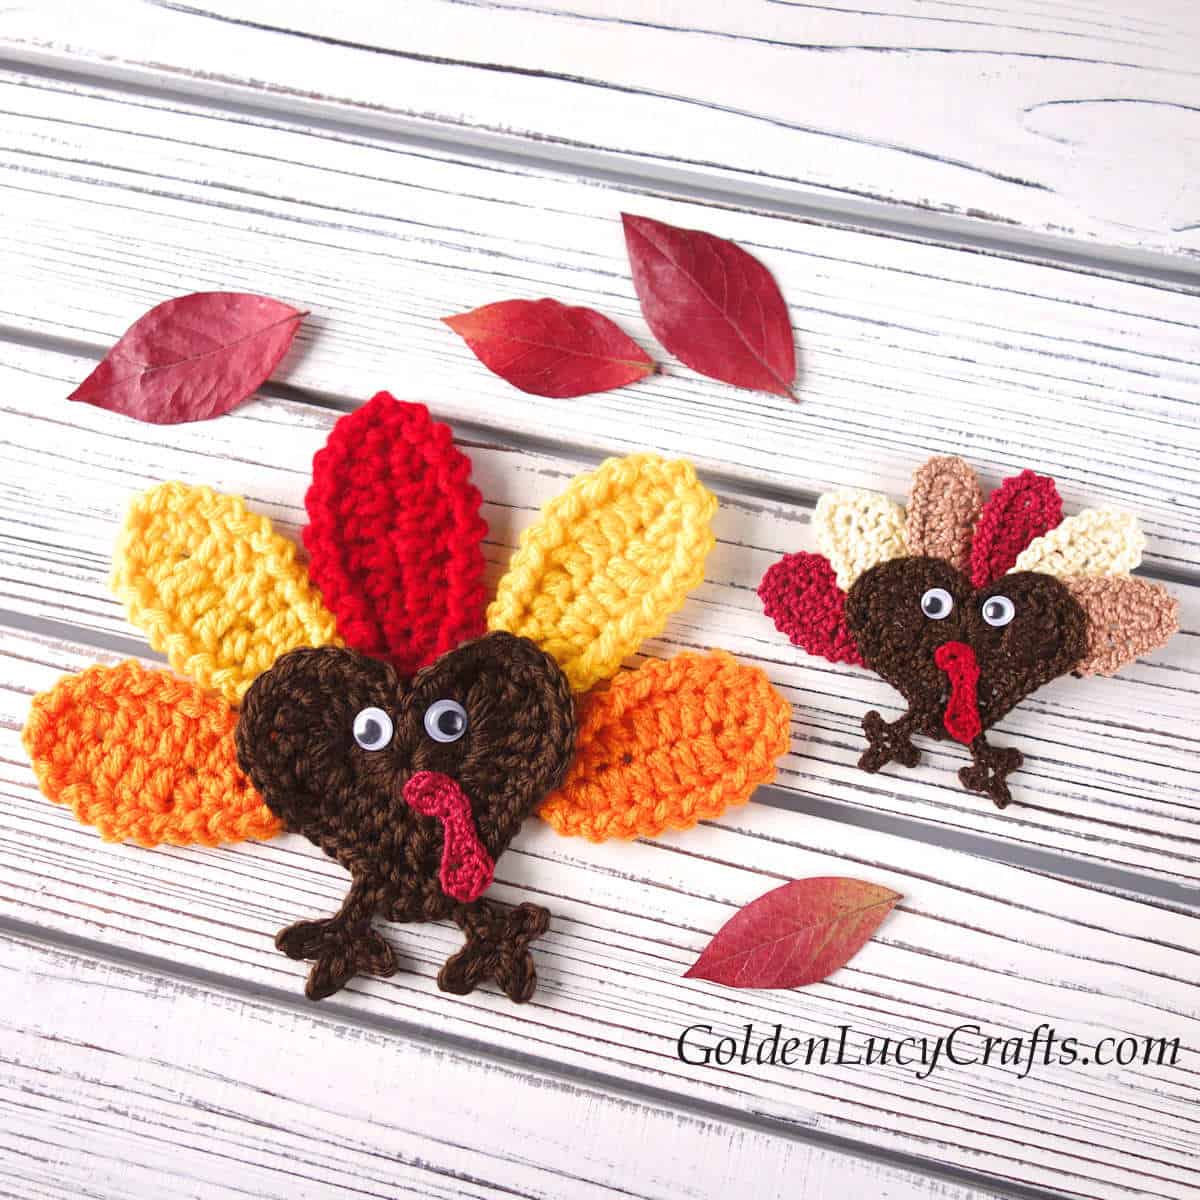 Large and small crochet turkey appliques.